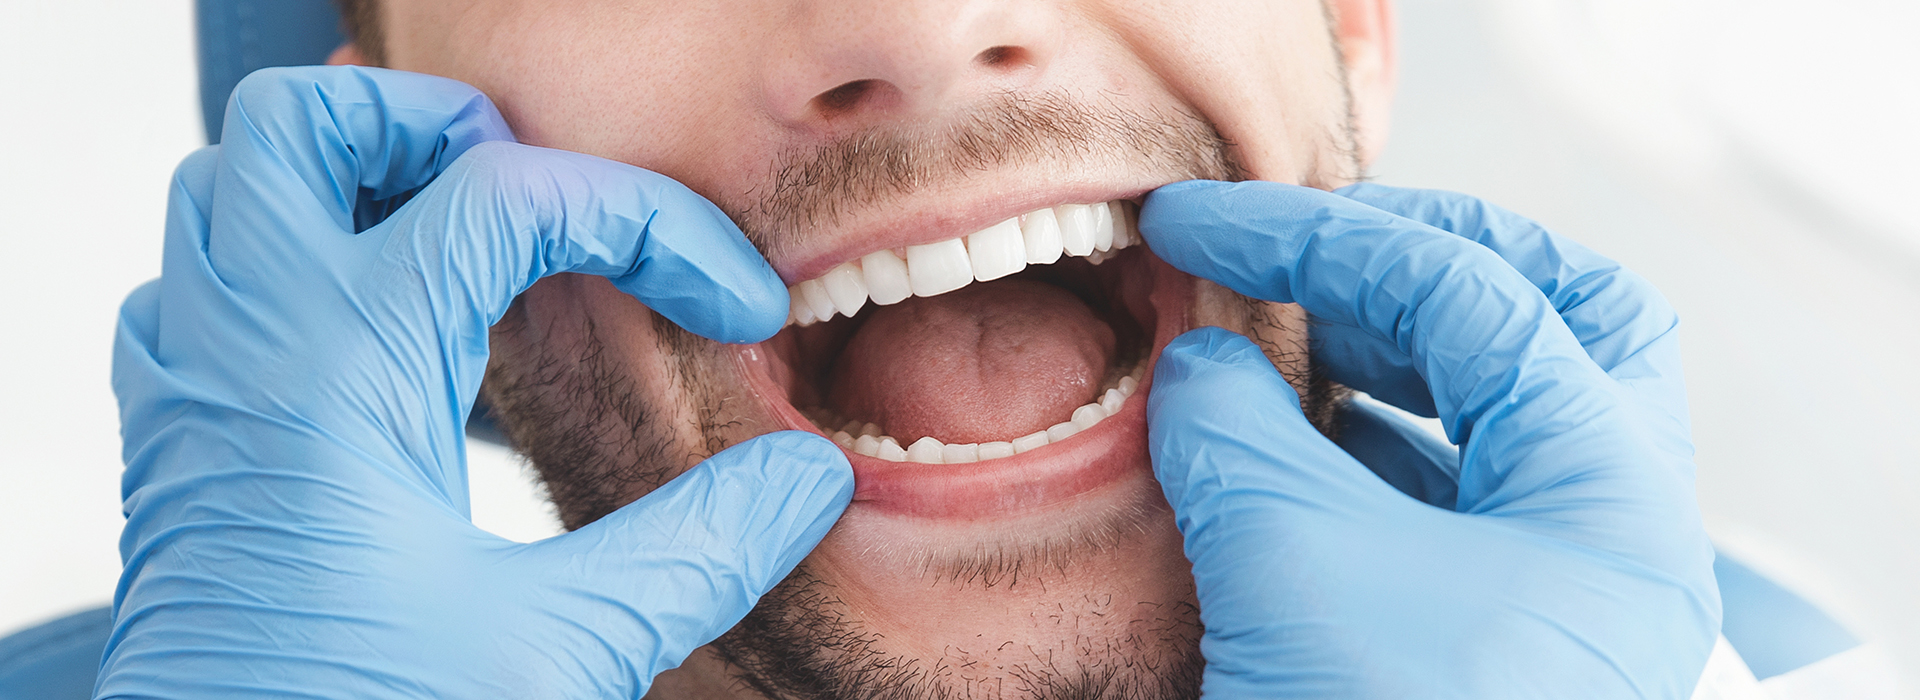 Uyesugi Dental | Cosmetic Dentistry, Periodontal Treatment and Dentures